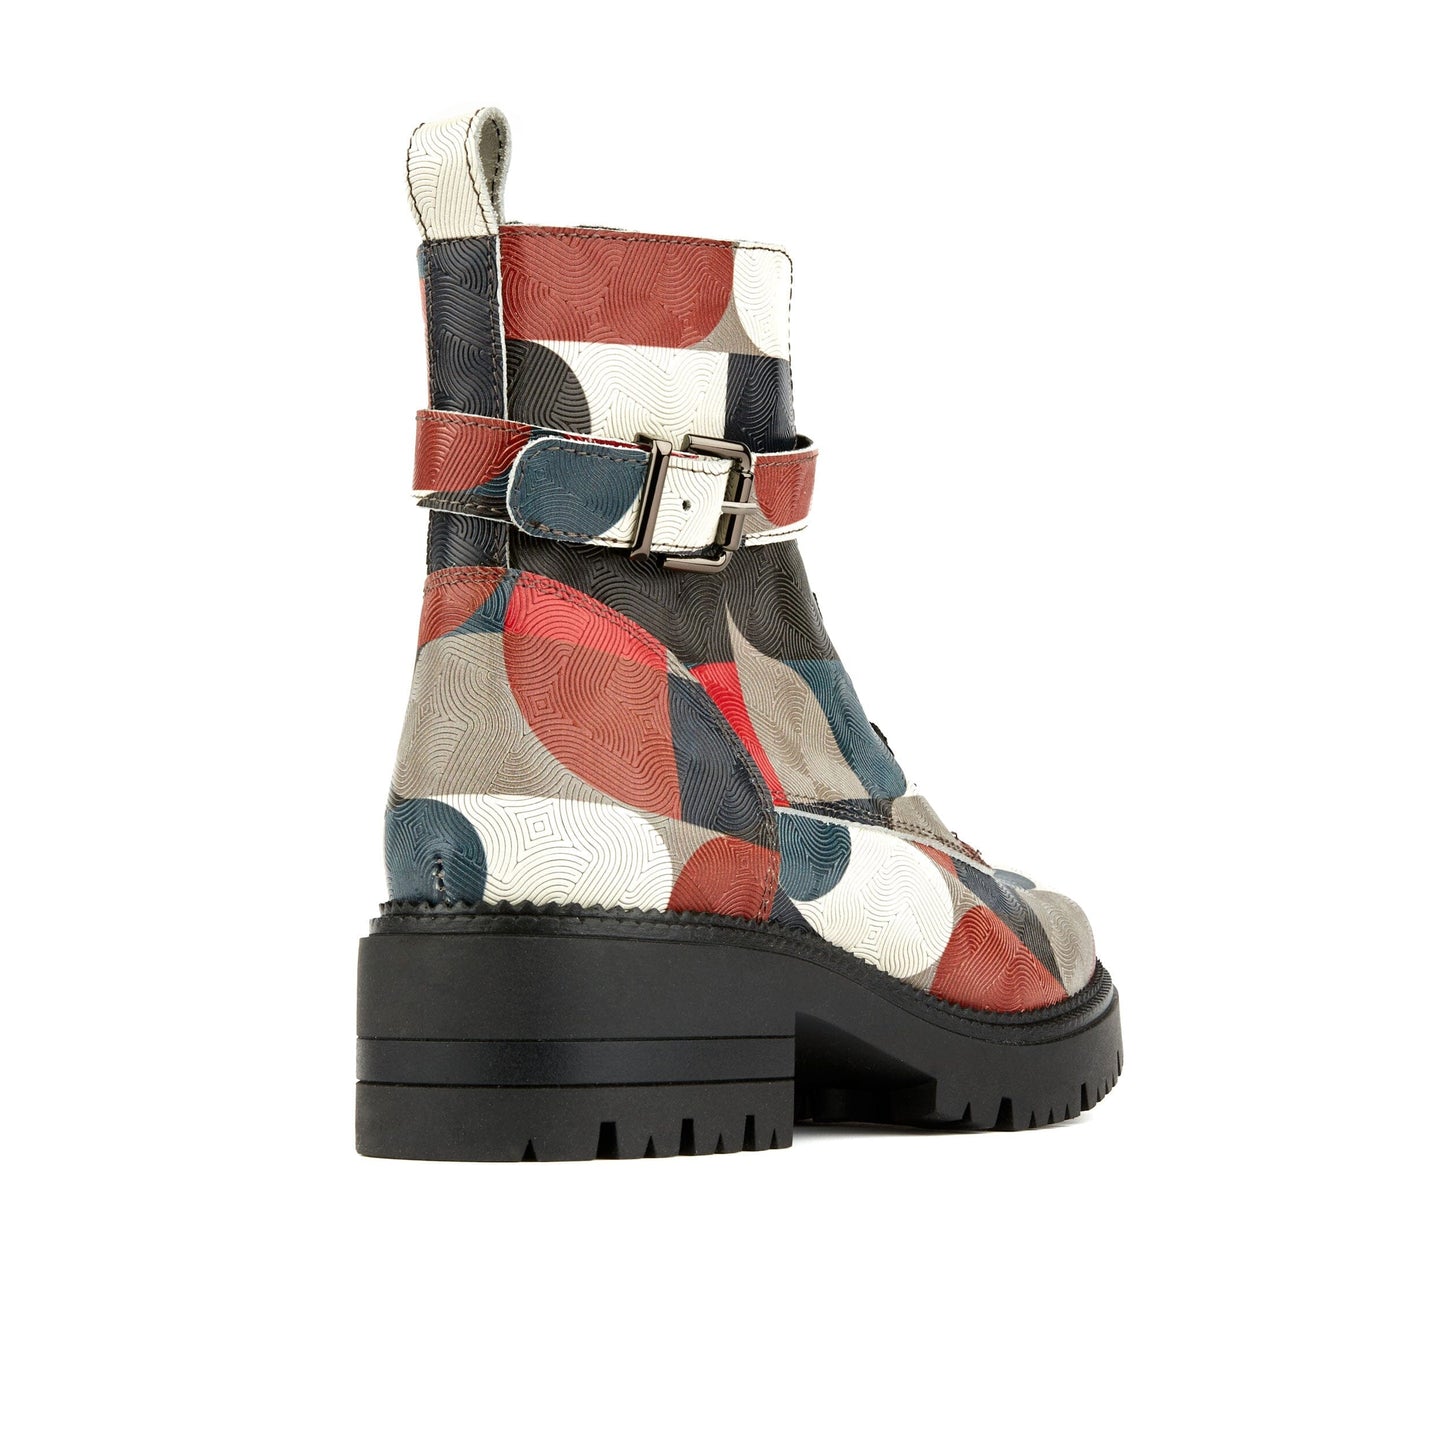 Hayley Wool - Black & Red Groovy Womens Ankle Boots Embassy London 